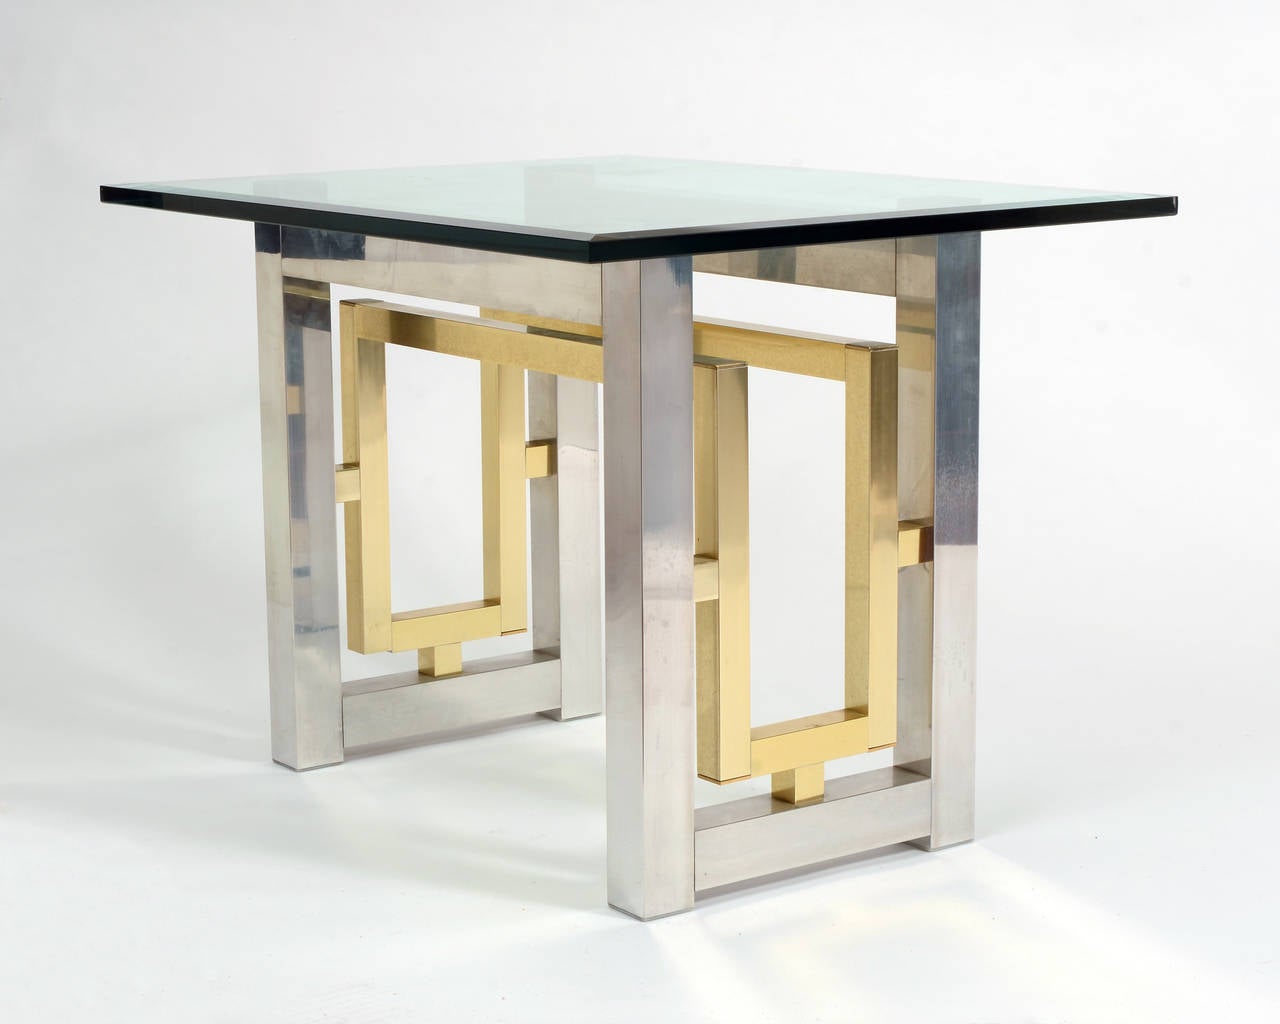 Stylish pair of end tables having a mix of chrome and brass in a geometric Mid-Century Modern design.
Bevelled glass tops are not included.